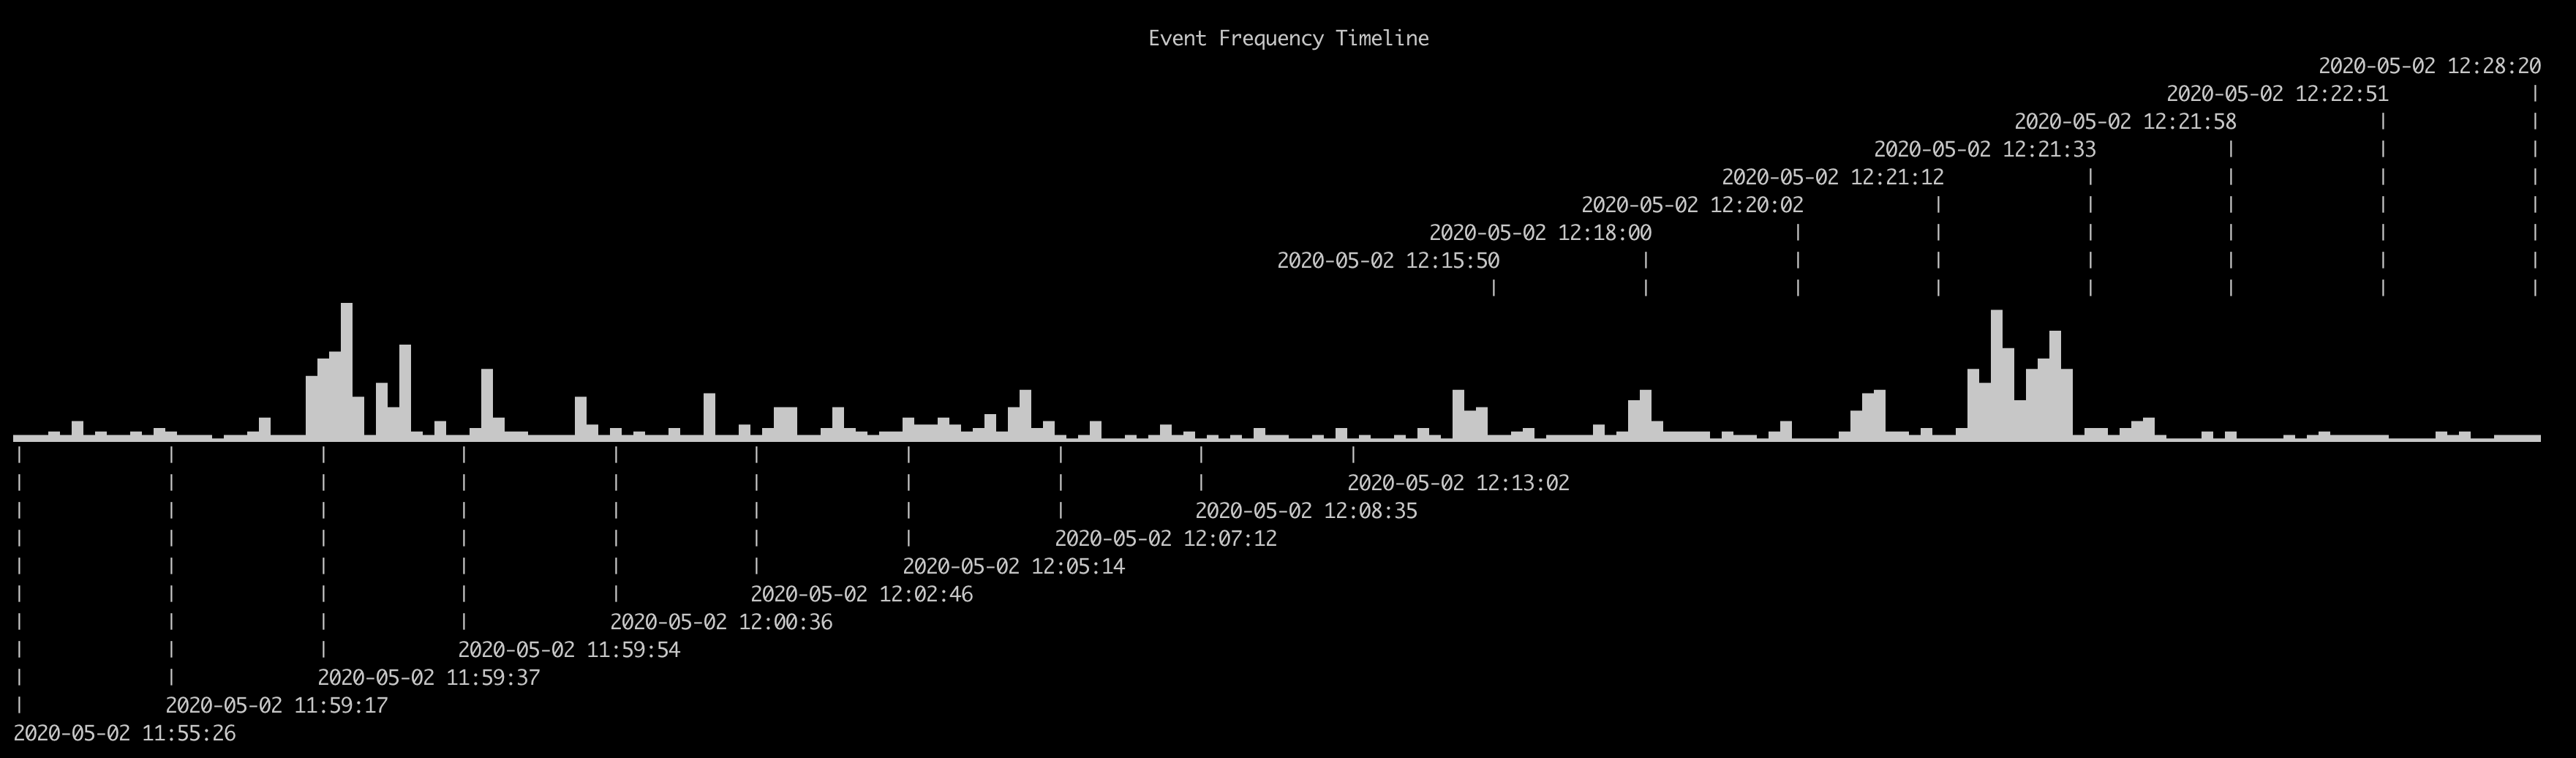 Hayabusa Detection Frequency Timeline